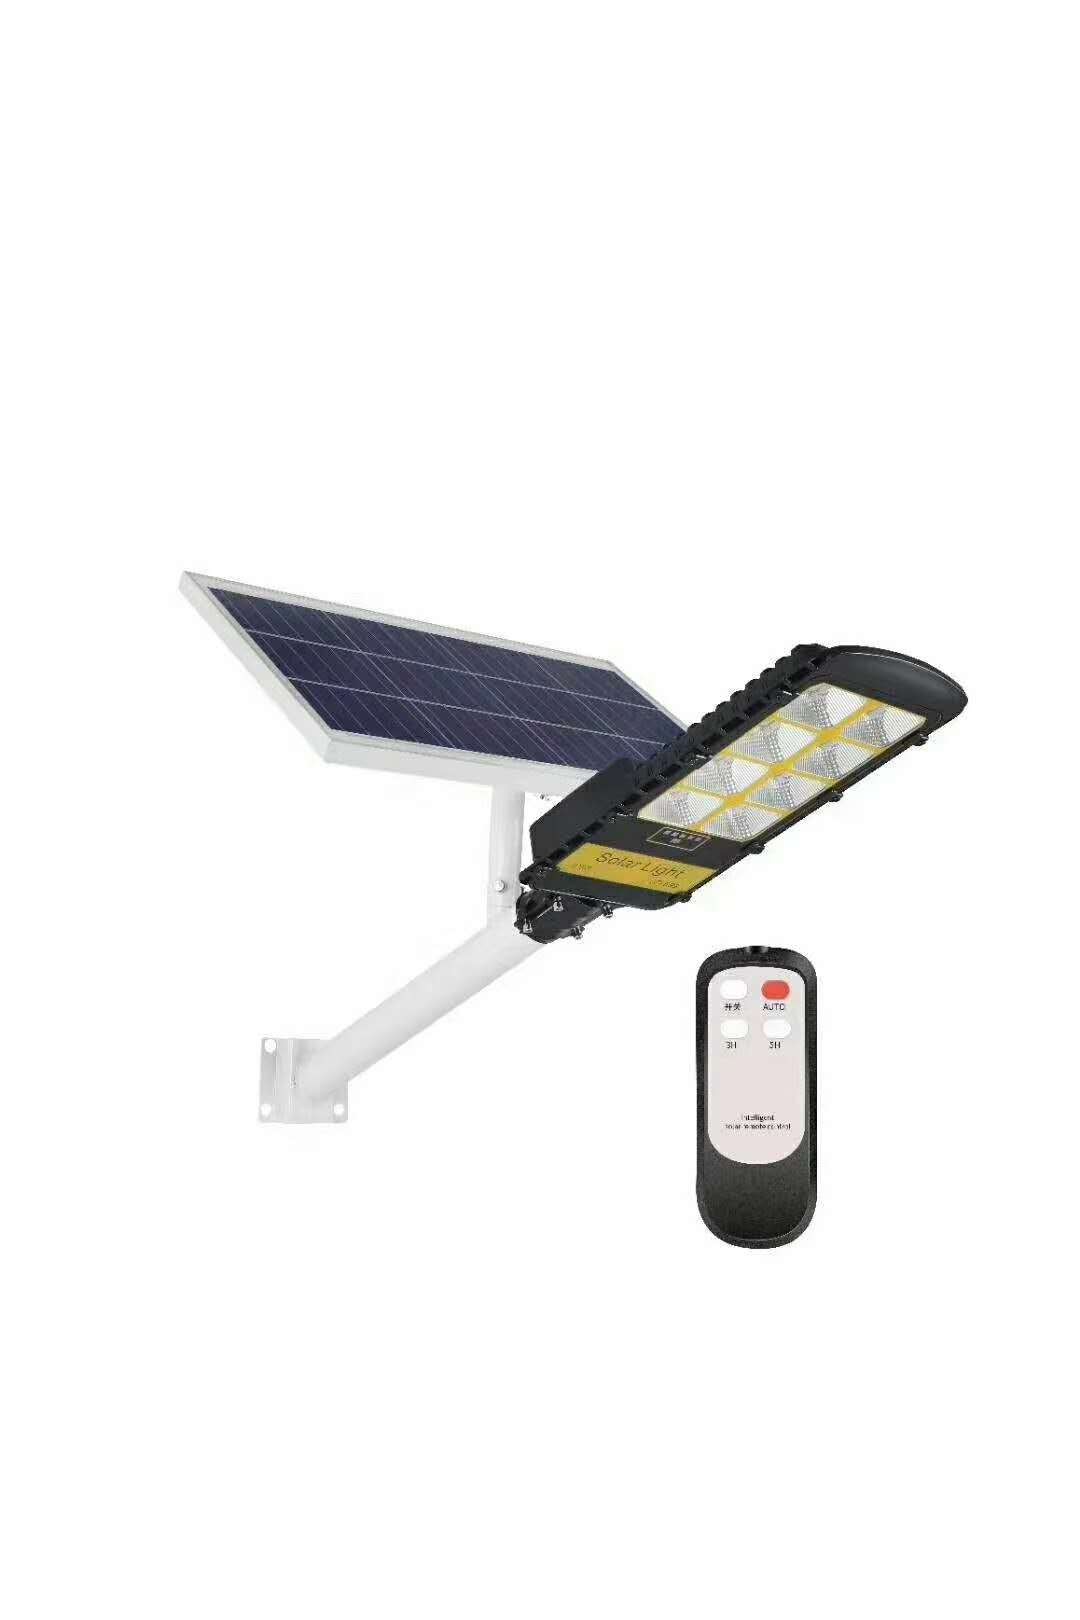 20w outdoor good price solar panel street light with remote control in China